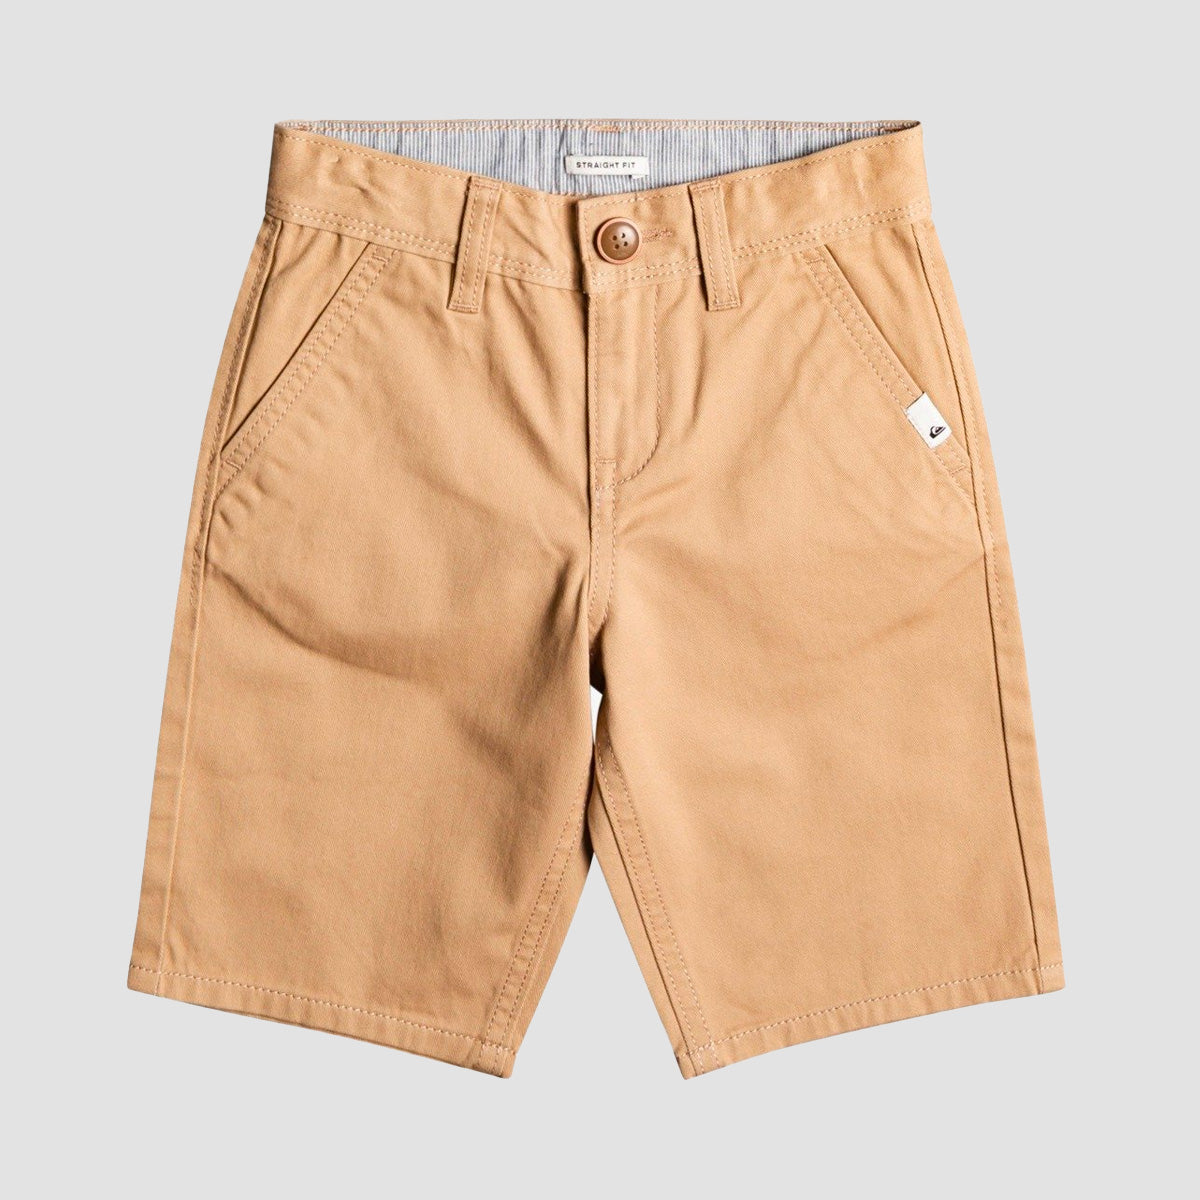 Quiksilver Everyday Chino Shorts 2-7 Years Incense - Kids